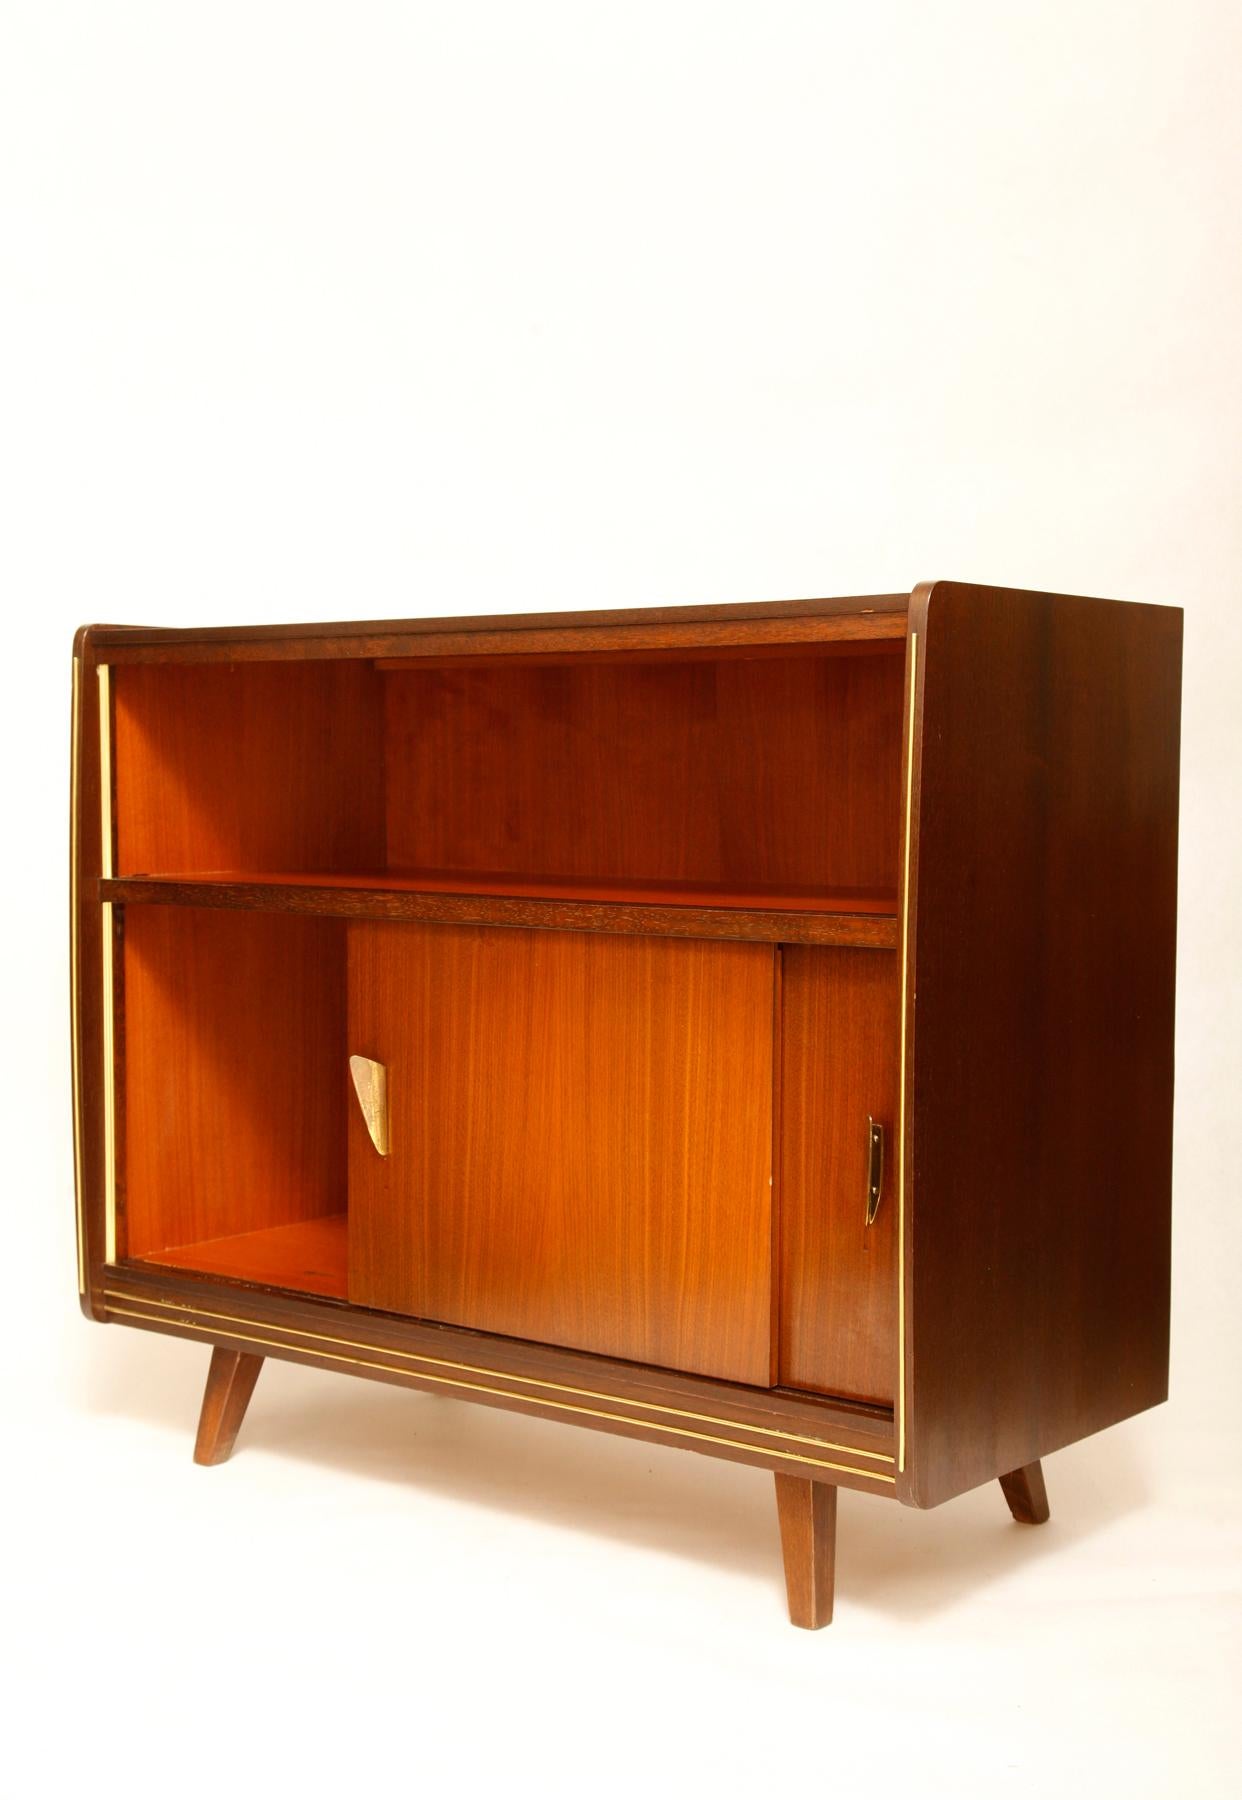 Wood Mid-Century Modern Small German TV Cupboard with Sliding Door, 1960s For Sale